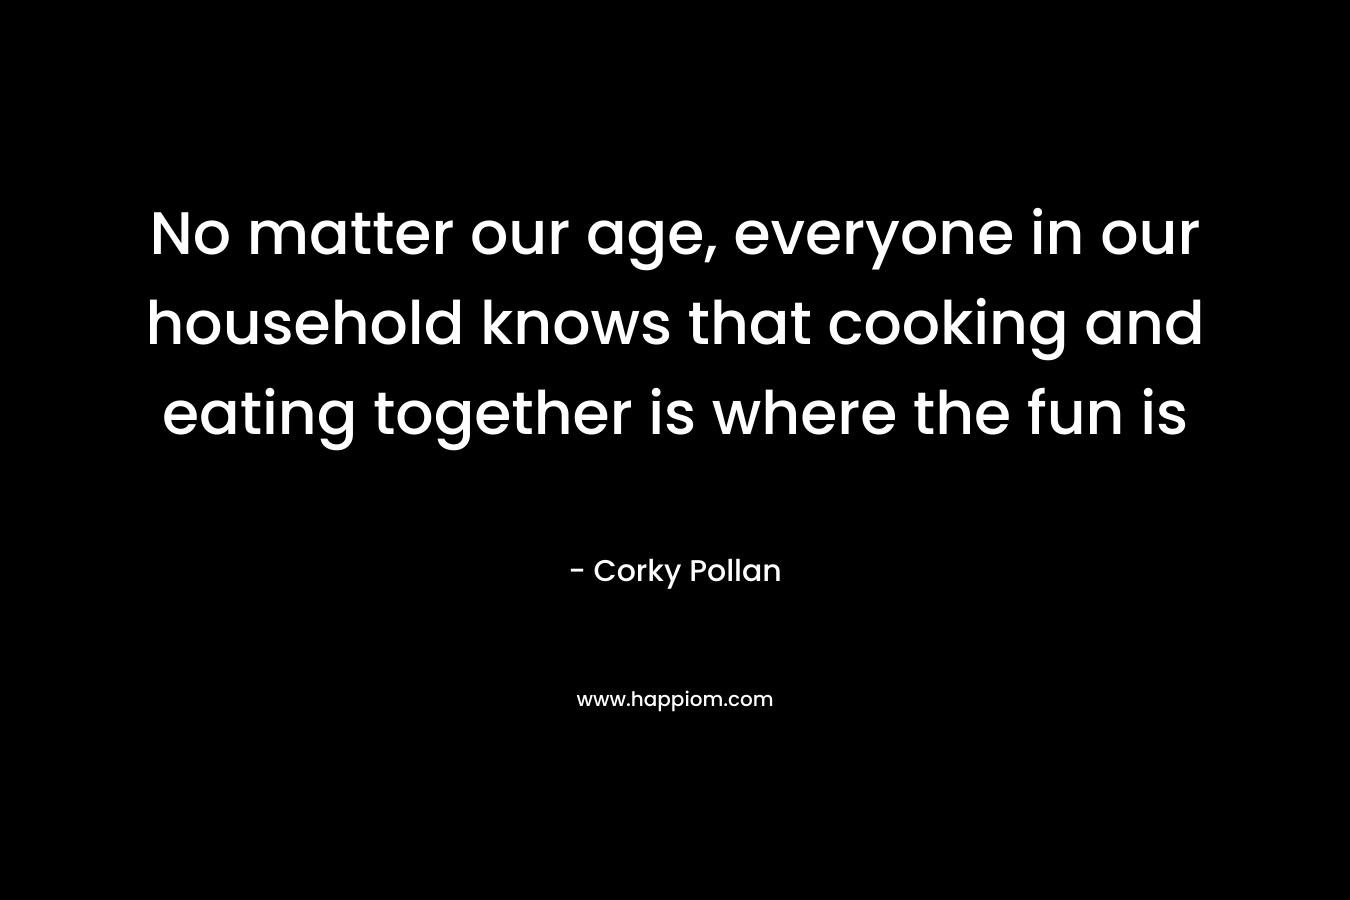 No matter our age, everyone in our household knows that cooking and eating together is where the fun is